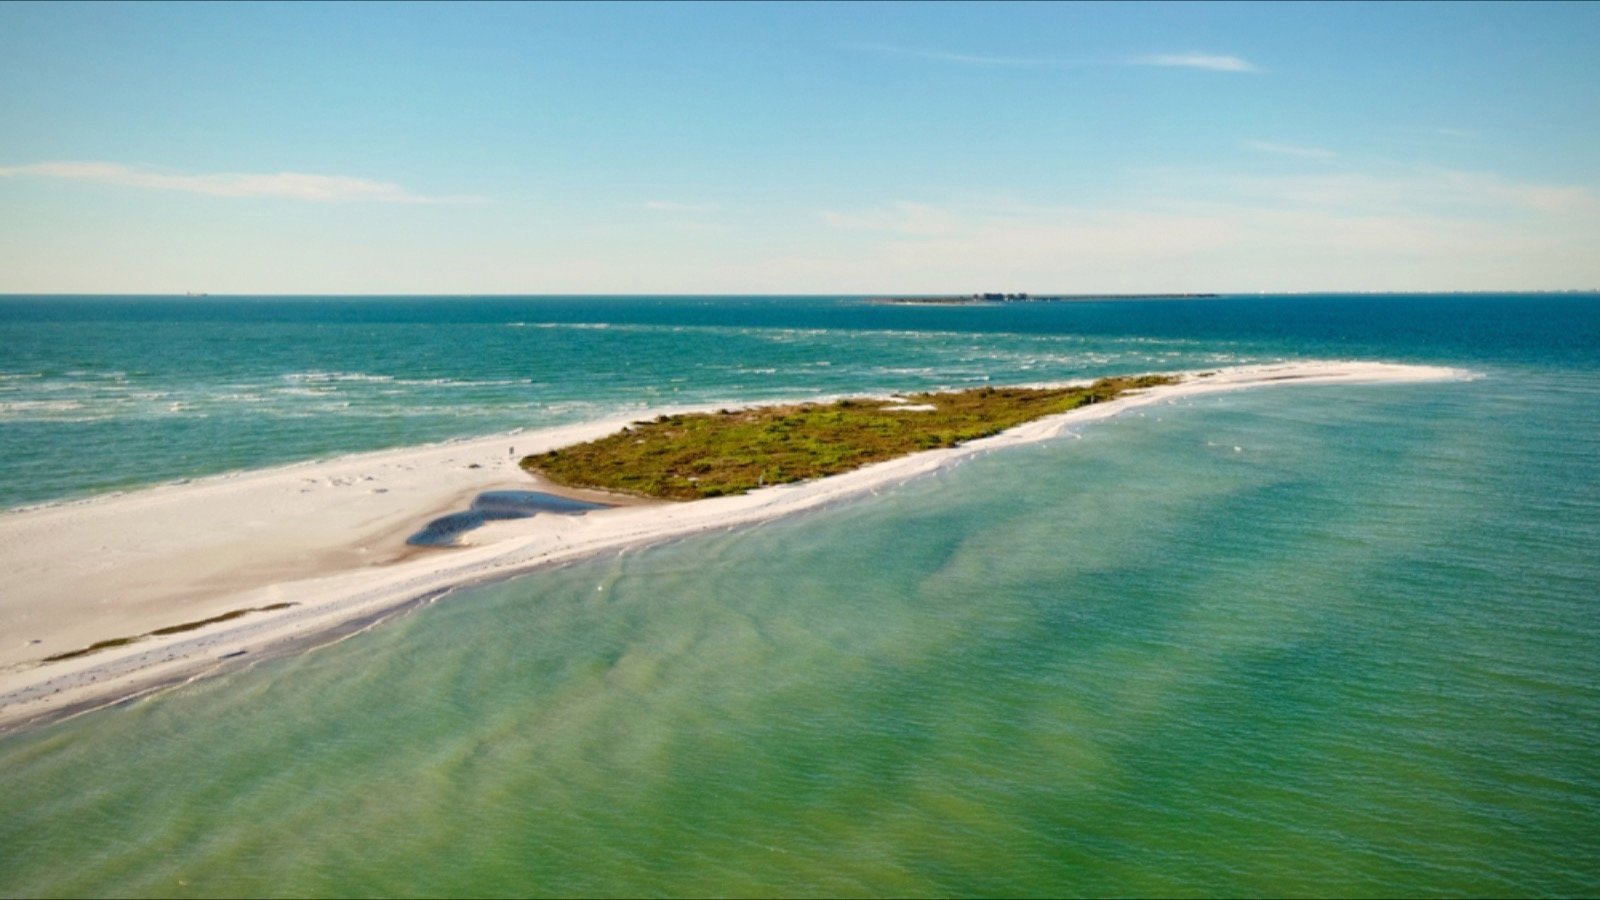 <p>This wildlife refuge is the only place in the world to observe the endangered Key deer. Nearby is Bahia Honda State Park in Monroe County, where an entry fee of $10 takes you to palm tree-lined beaches with crystal-clear waters and some of the best snorkeling in the state.</p>